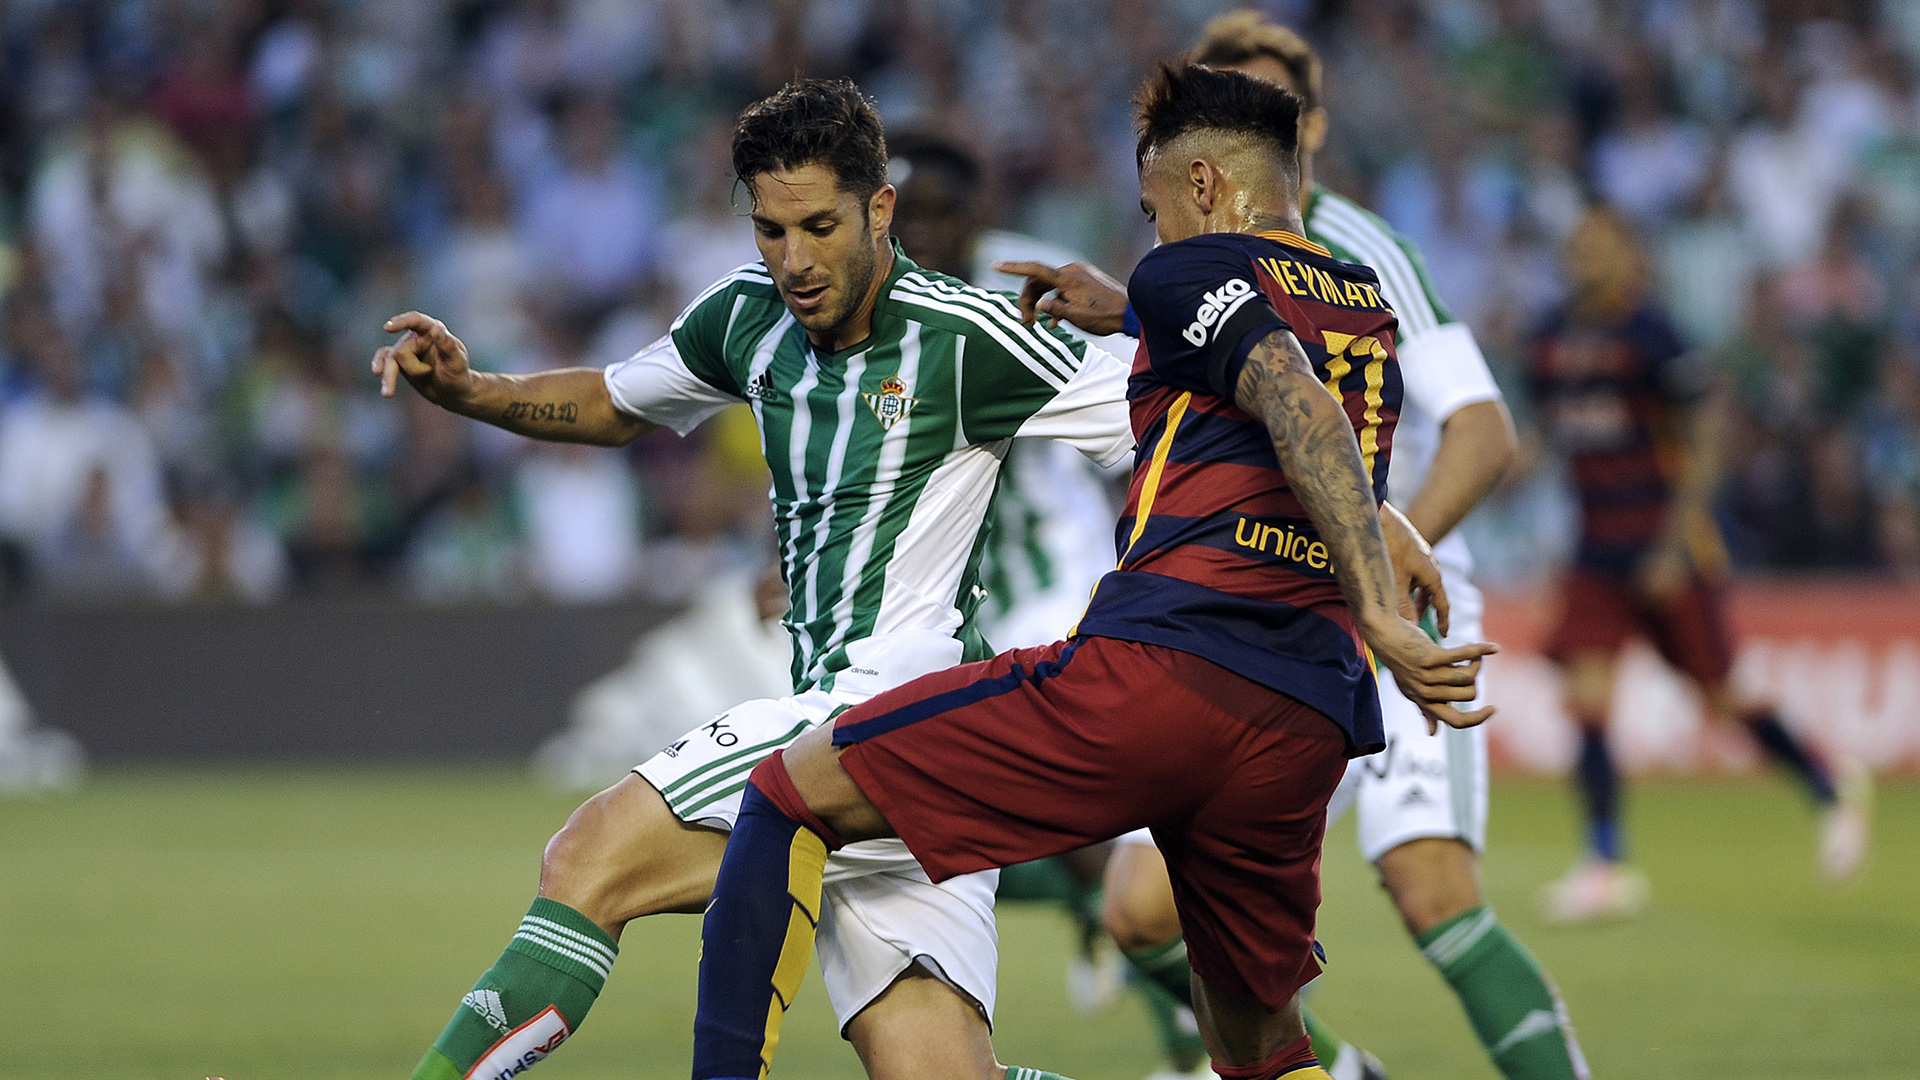 Barcelona's Brazilian forward Neymar (R) vies with Betis' midfielder Alvaro Cejudo (L) during the Spanish league football match Real Betis Balompie vs FC Barcelona at the Benito Villamarin stadium in Sevilla on April 30, 2016. / AFP / CRISTINA QUICLER        (Photo credit should read CRISTINA QUICLER/AFP/Getty Images)